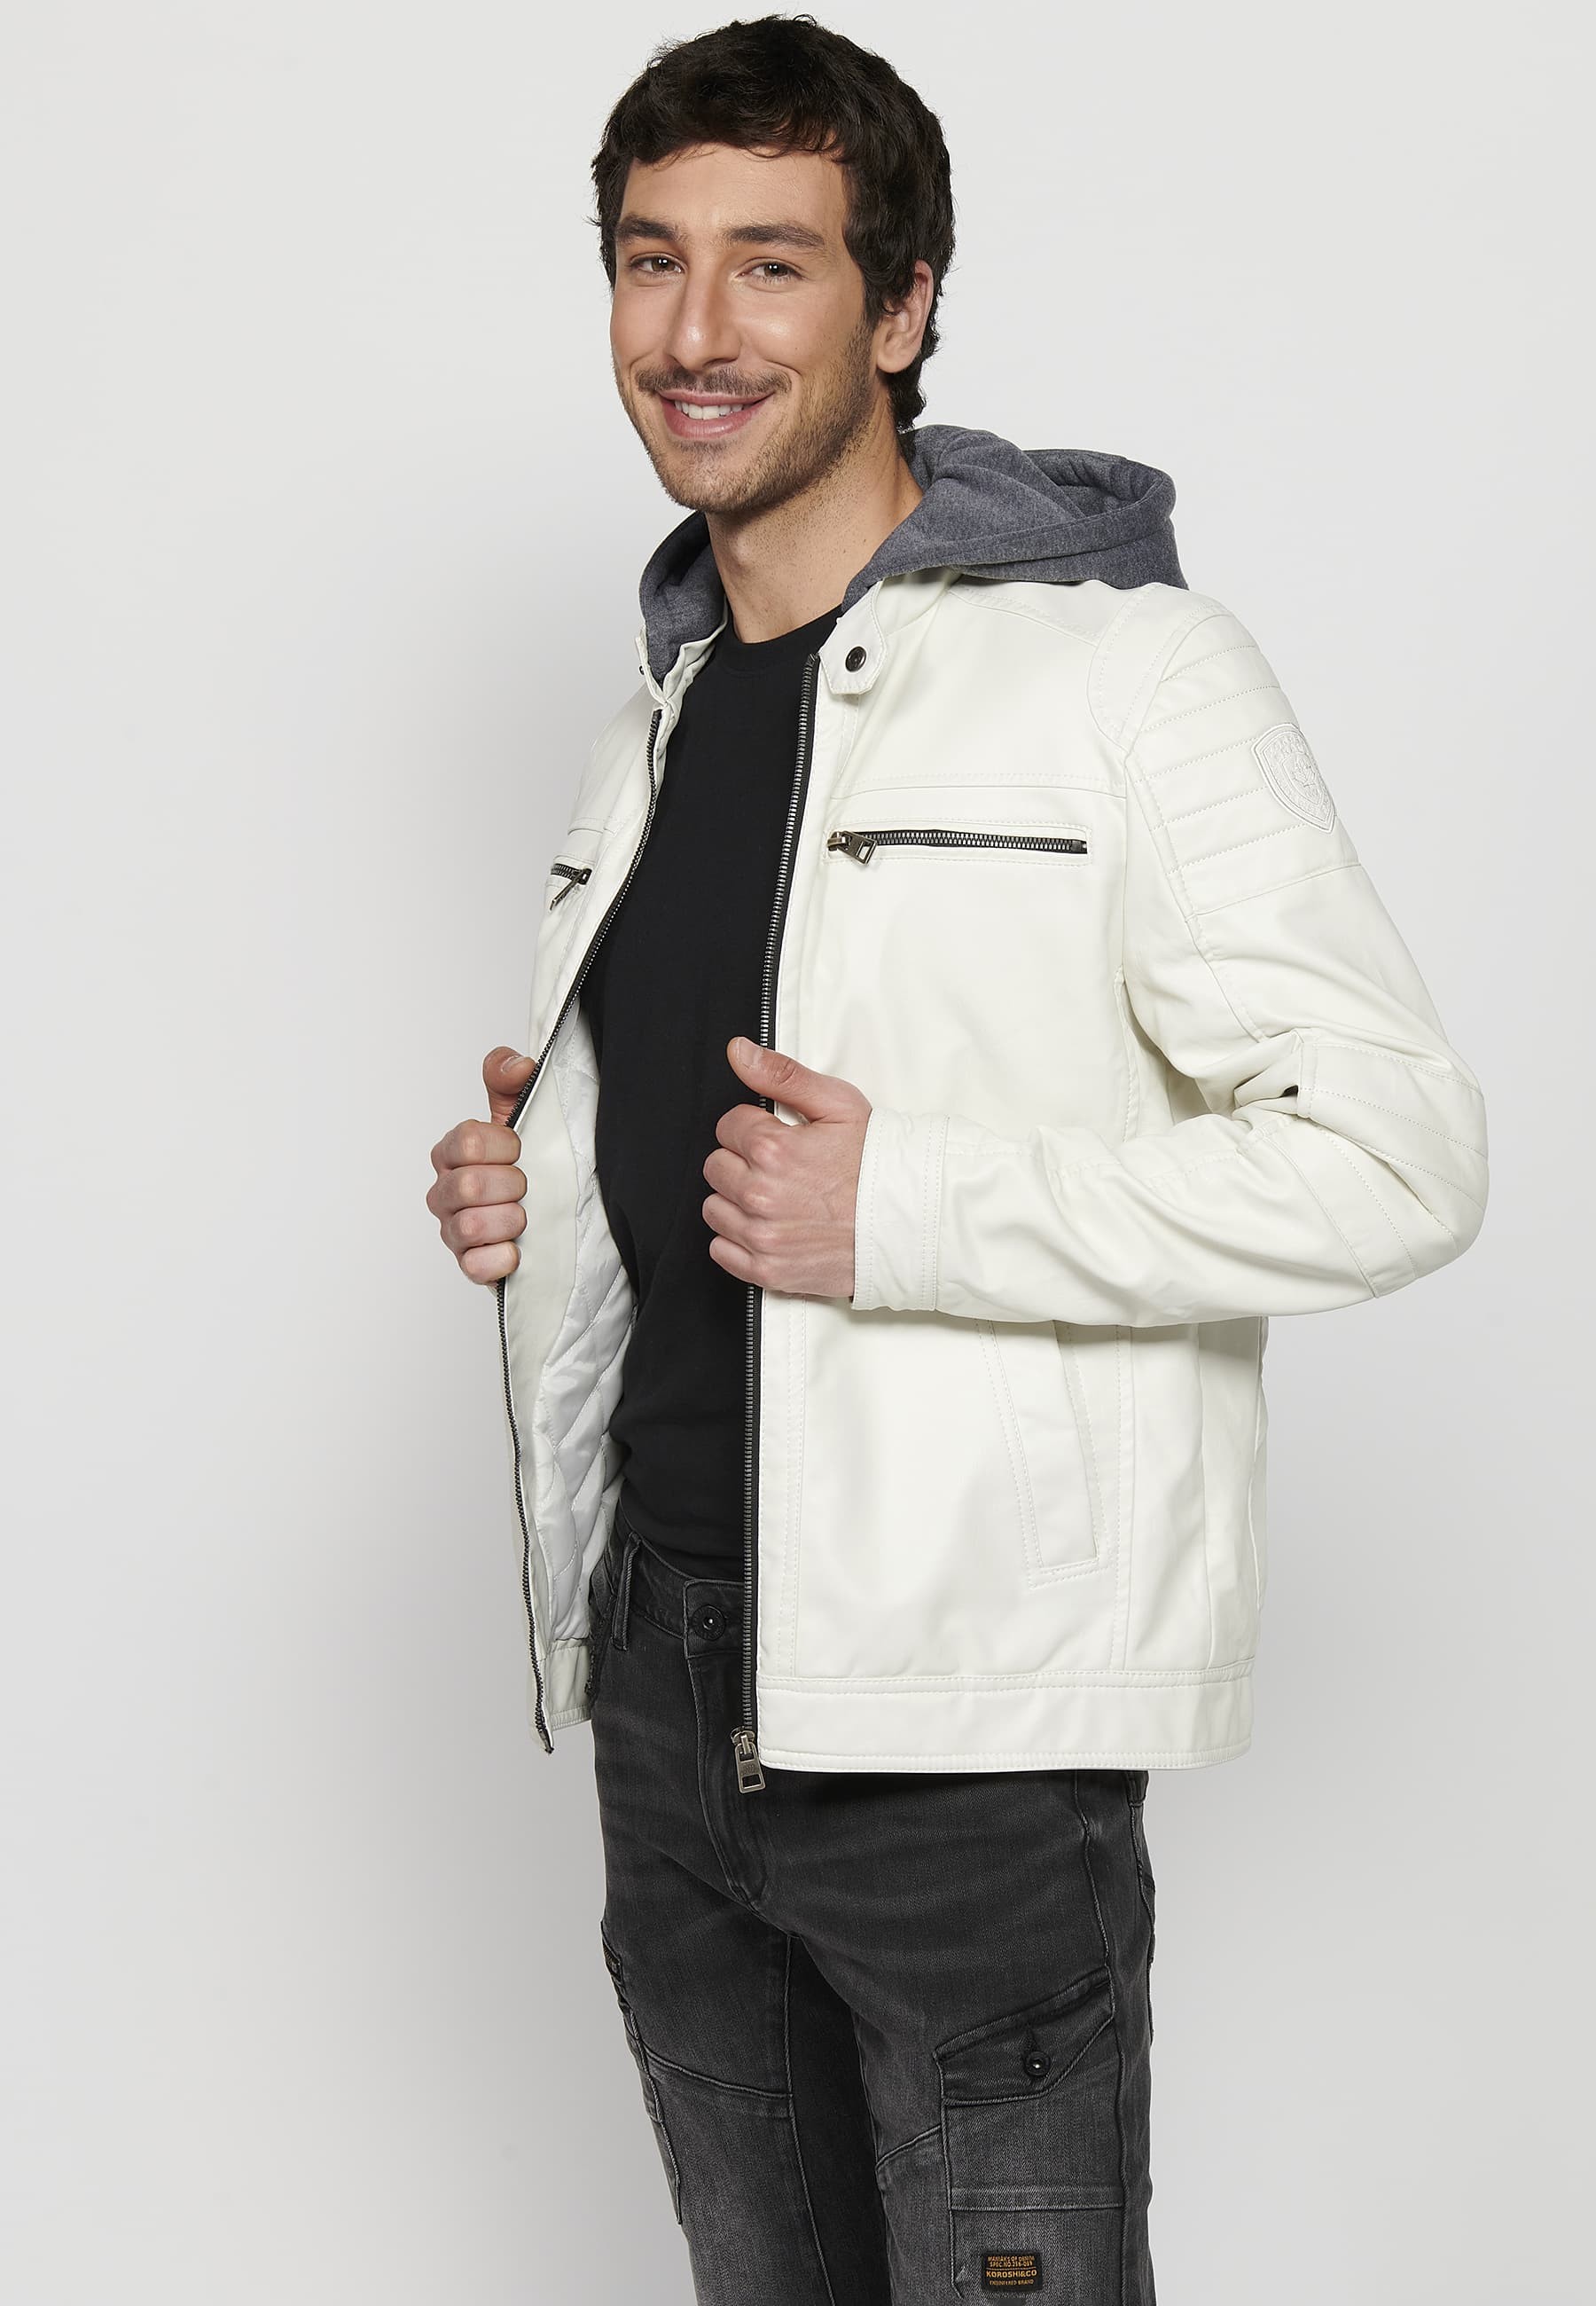 Long-sleeved jacket with zipper front closure and adjustable detachable hooded collar with drawstring in Ecru for Men 12